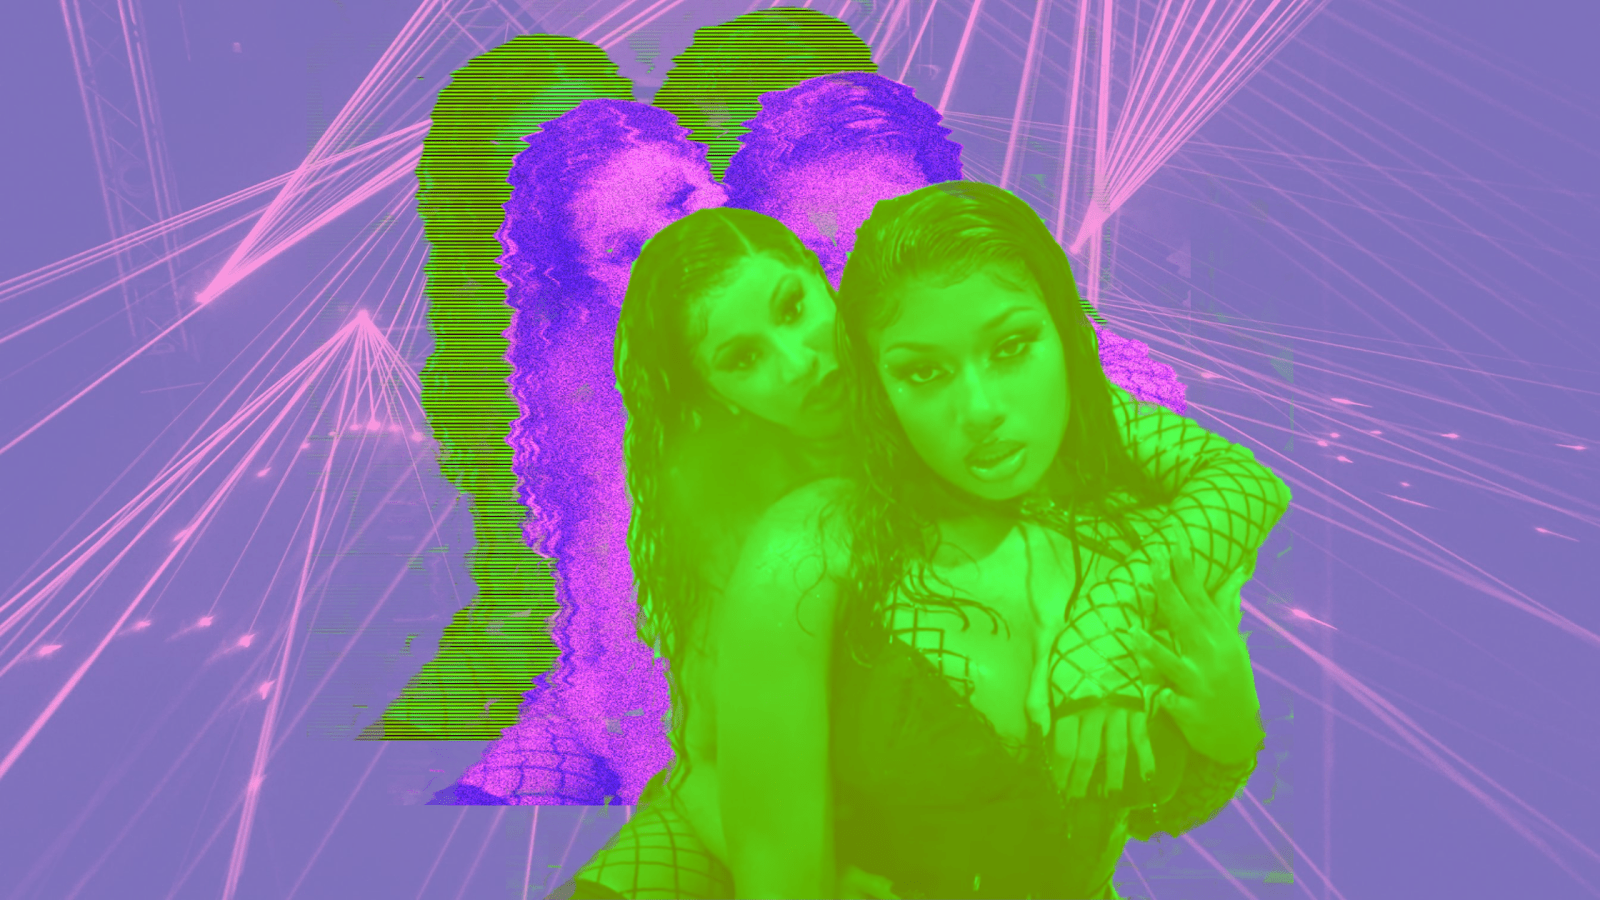 Cardi B and Megan Thee Stallion in “WAP.” Graphic by Maggie Chirdo.